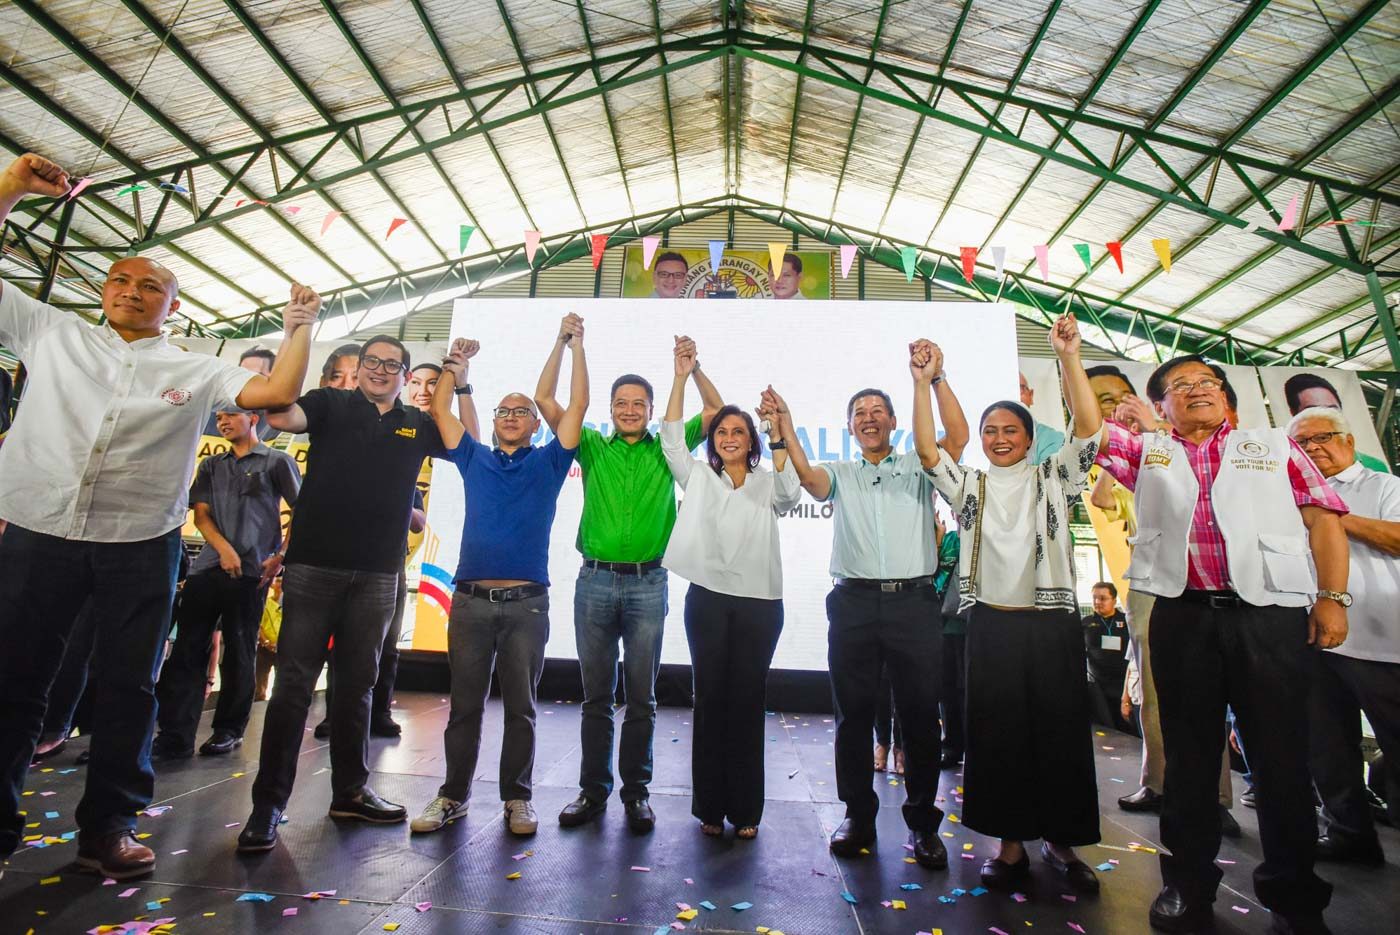 ENDORSEMENT OF THE VP. Opposition leader and Vice President Leni Robredo endorses the Otso Diretso candidates during the slate's launch on October 24, 2018. Photo by Maria Tan/Rappler  